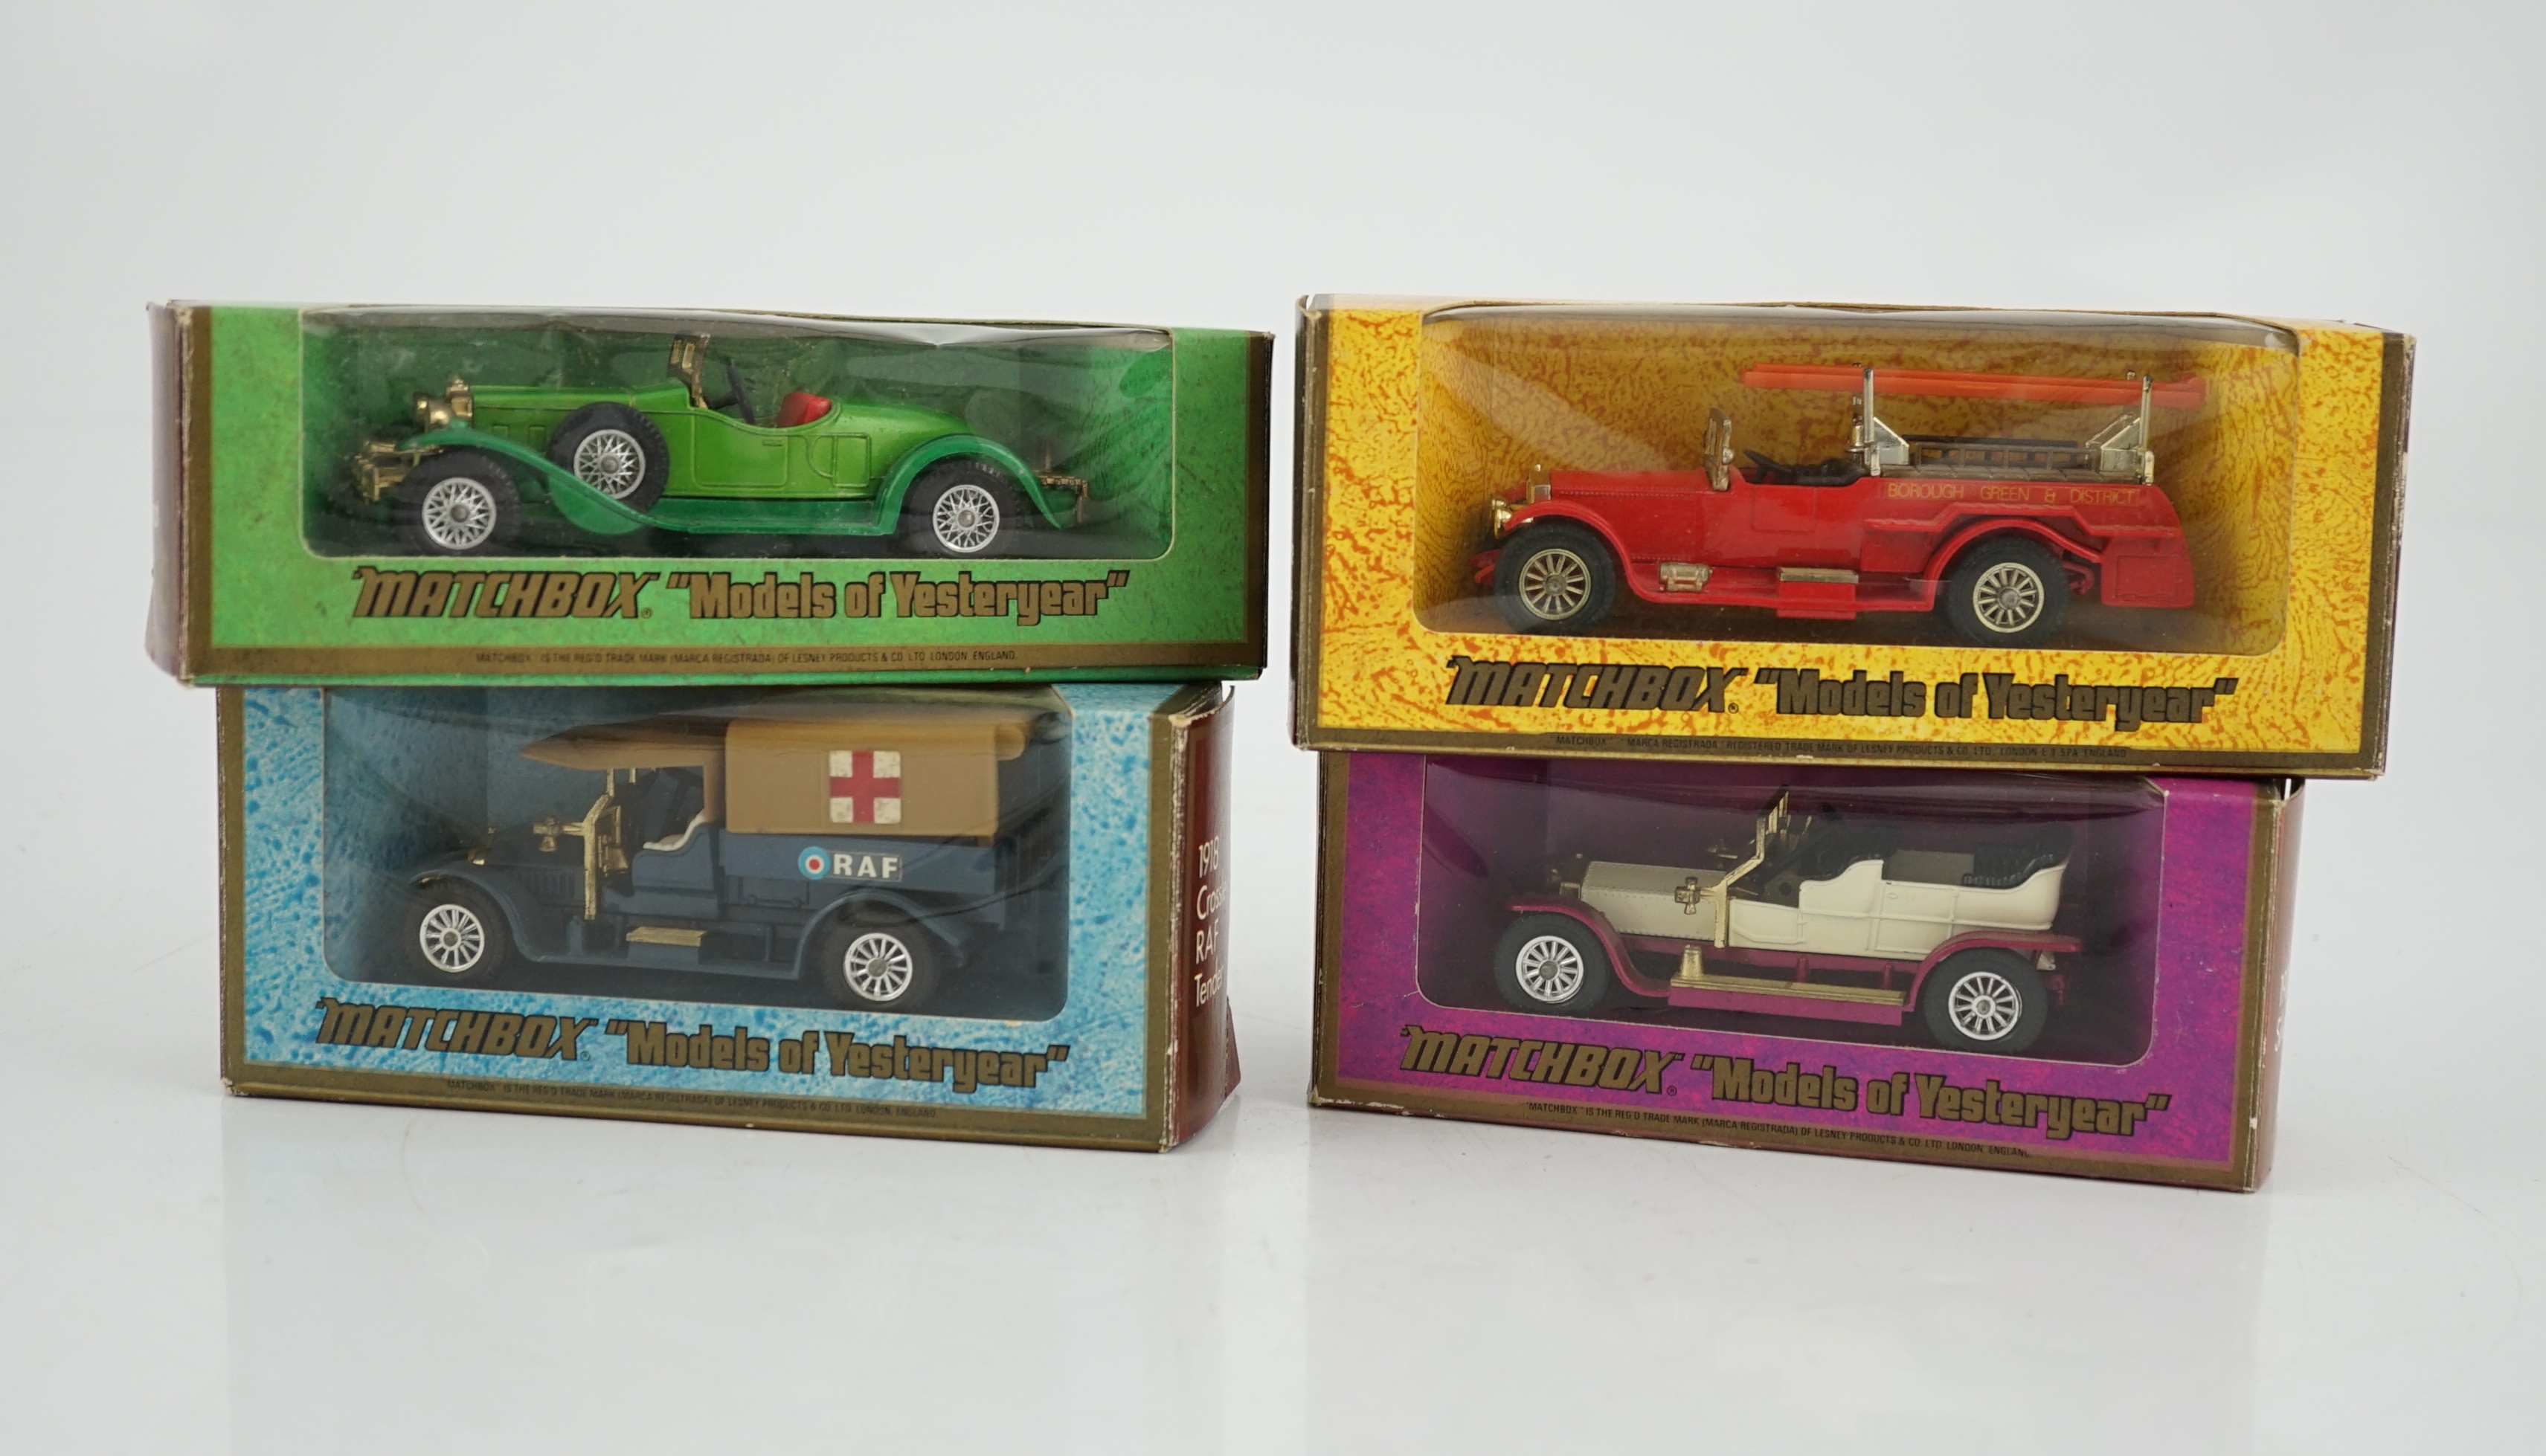 Seventy-nine Matchbox Models of Yesteryear in mainly woodgrain, cream and maroon era boxes, including cars and commercial vehicles